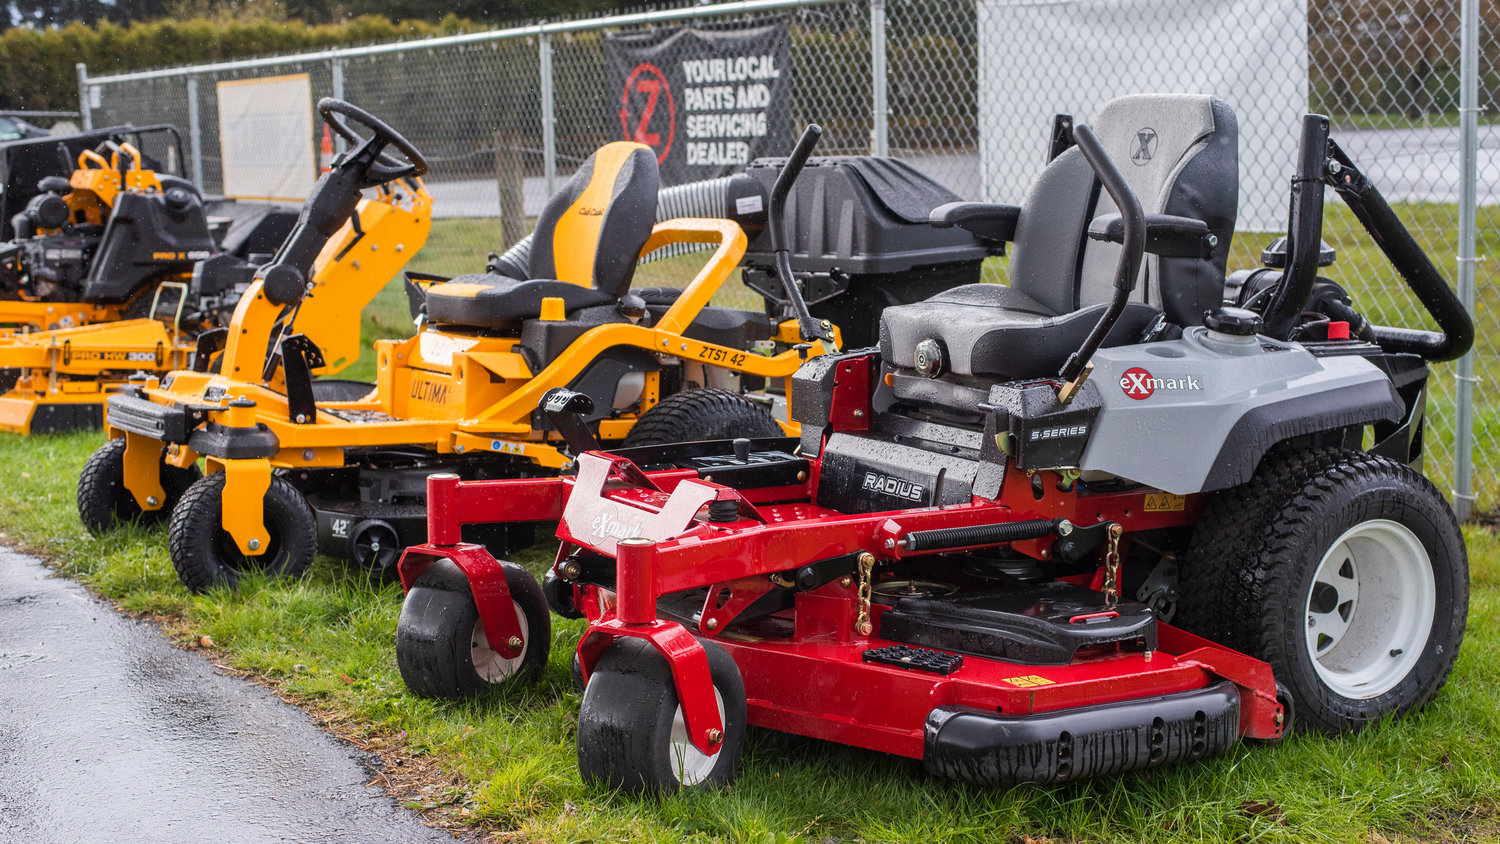 Riding lawn mowers sit on display outside the Power Shop in Centralia on Thursday.